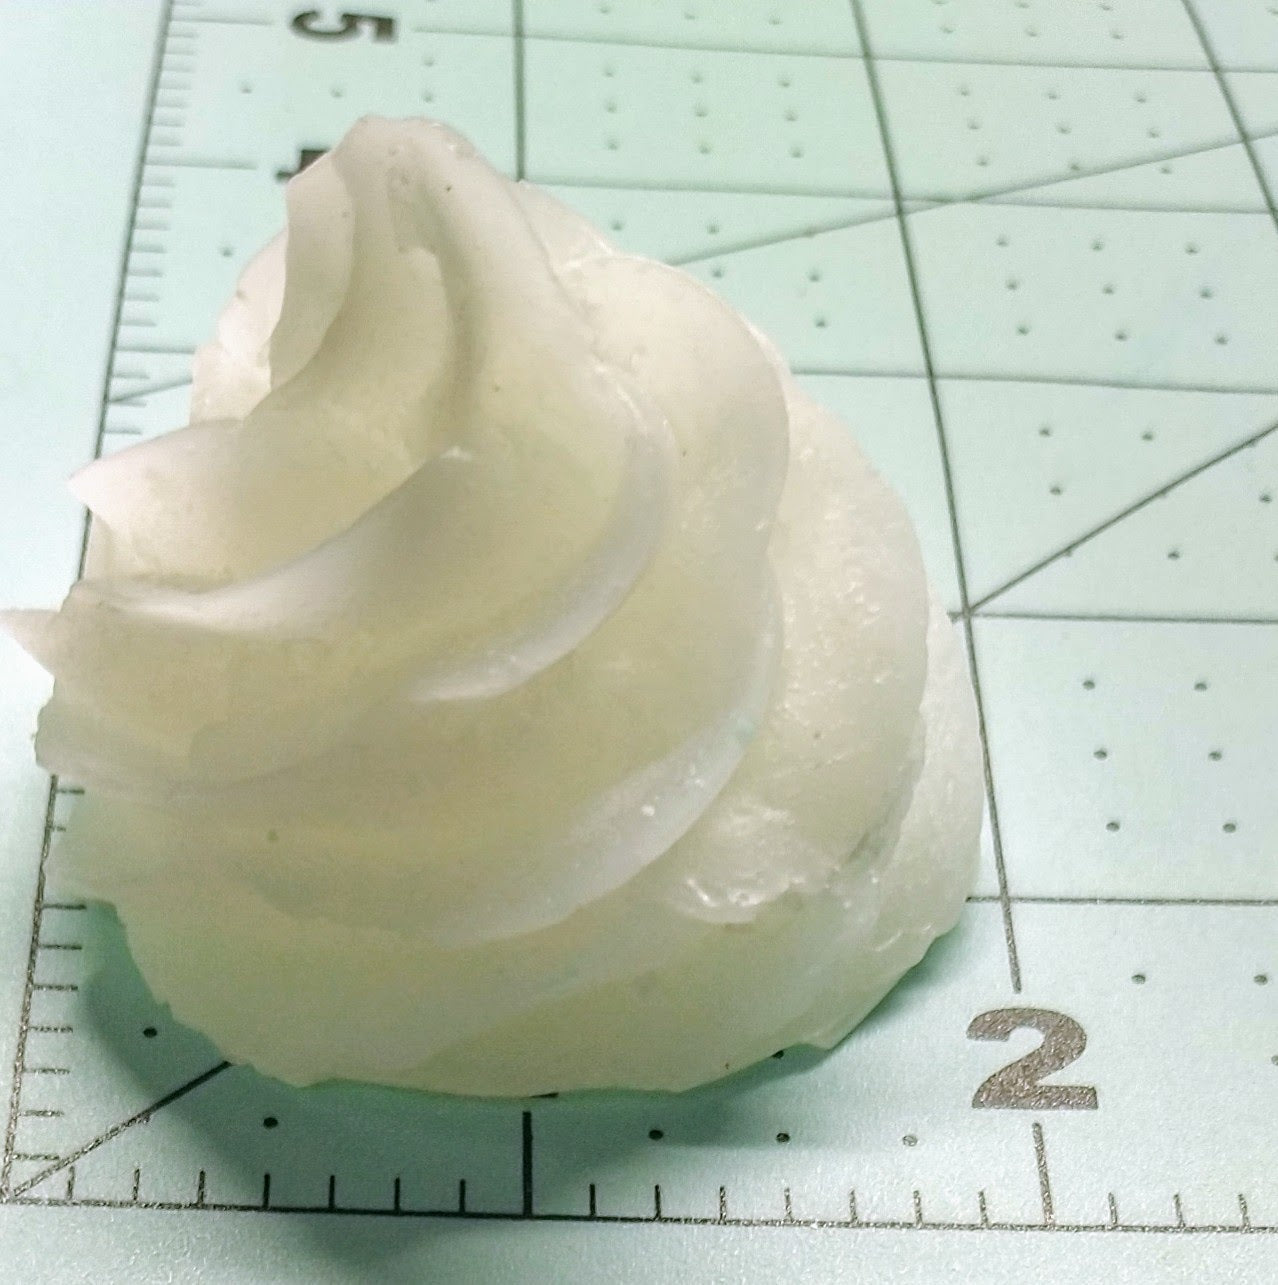 2pc Realistic Whipped Cream Dollop Silicone Mold| Food Shape Soap Mold | Whip Cream Dollop Shape Wax Candle Mold